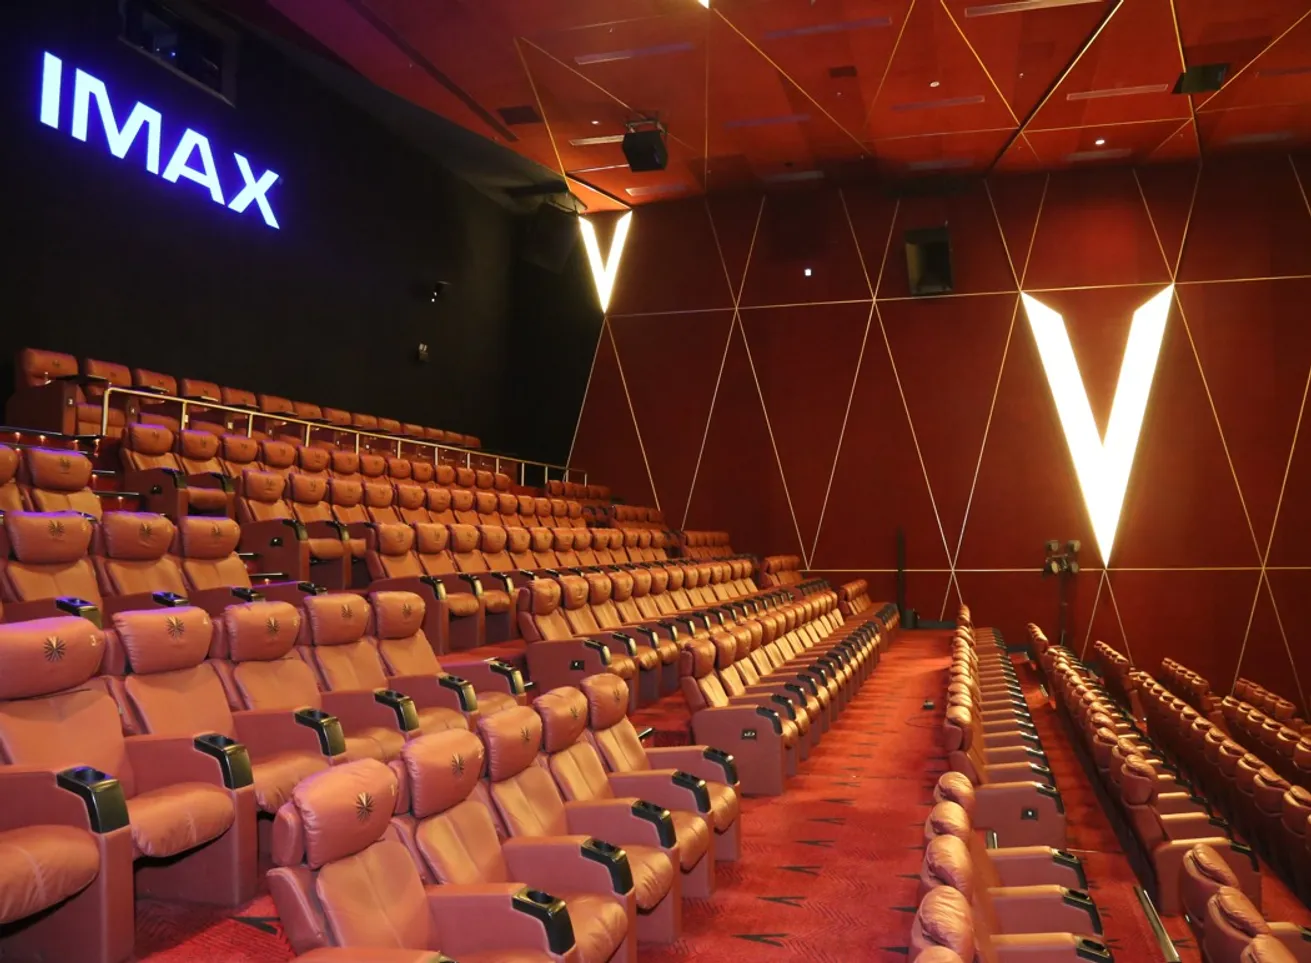 PVR INOX PARTNERS WITH MONDELEZ INDIA TO REDEFINE BIRTHDAY CELEBRATIONS WITH AI-POWERED PERSONALIZED SONGS AT THE CINEMA